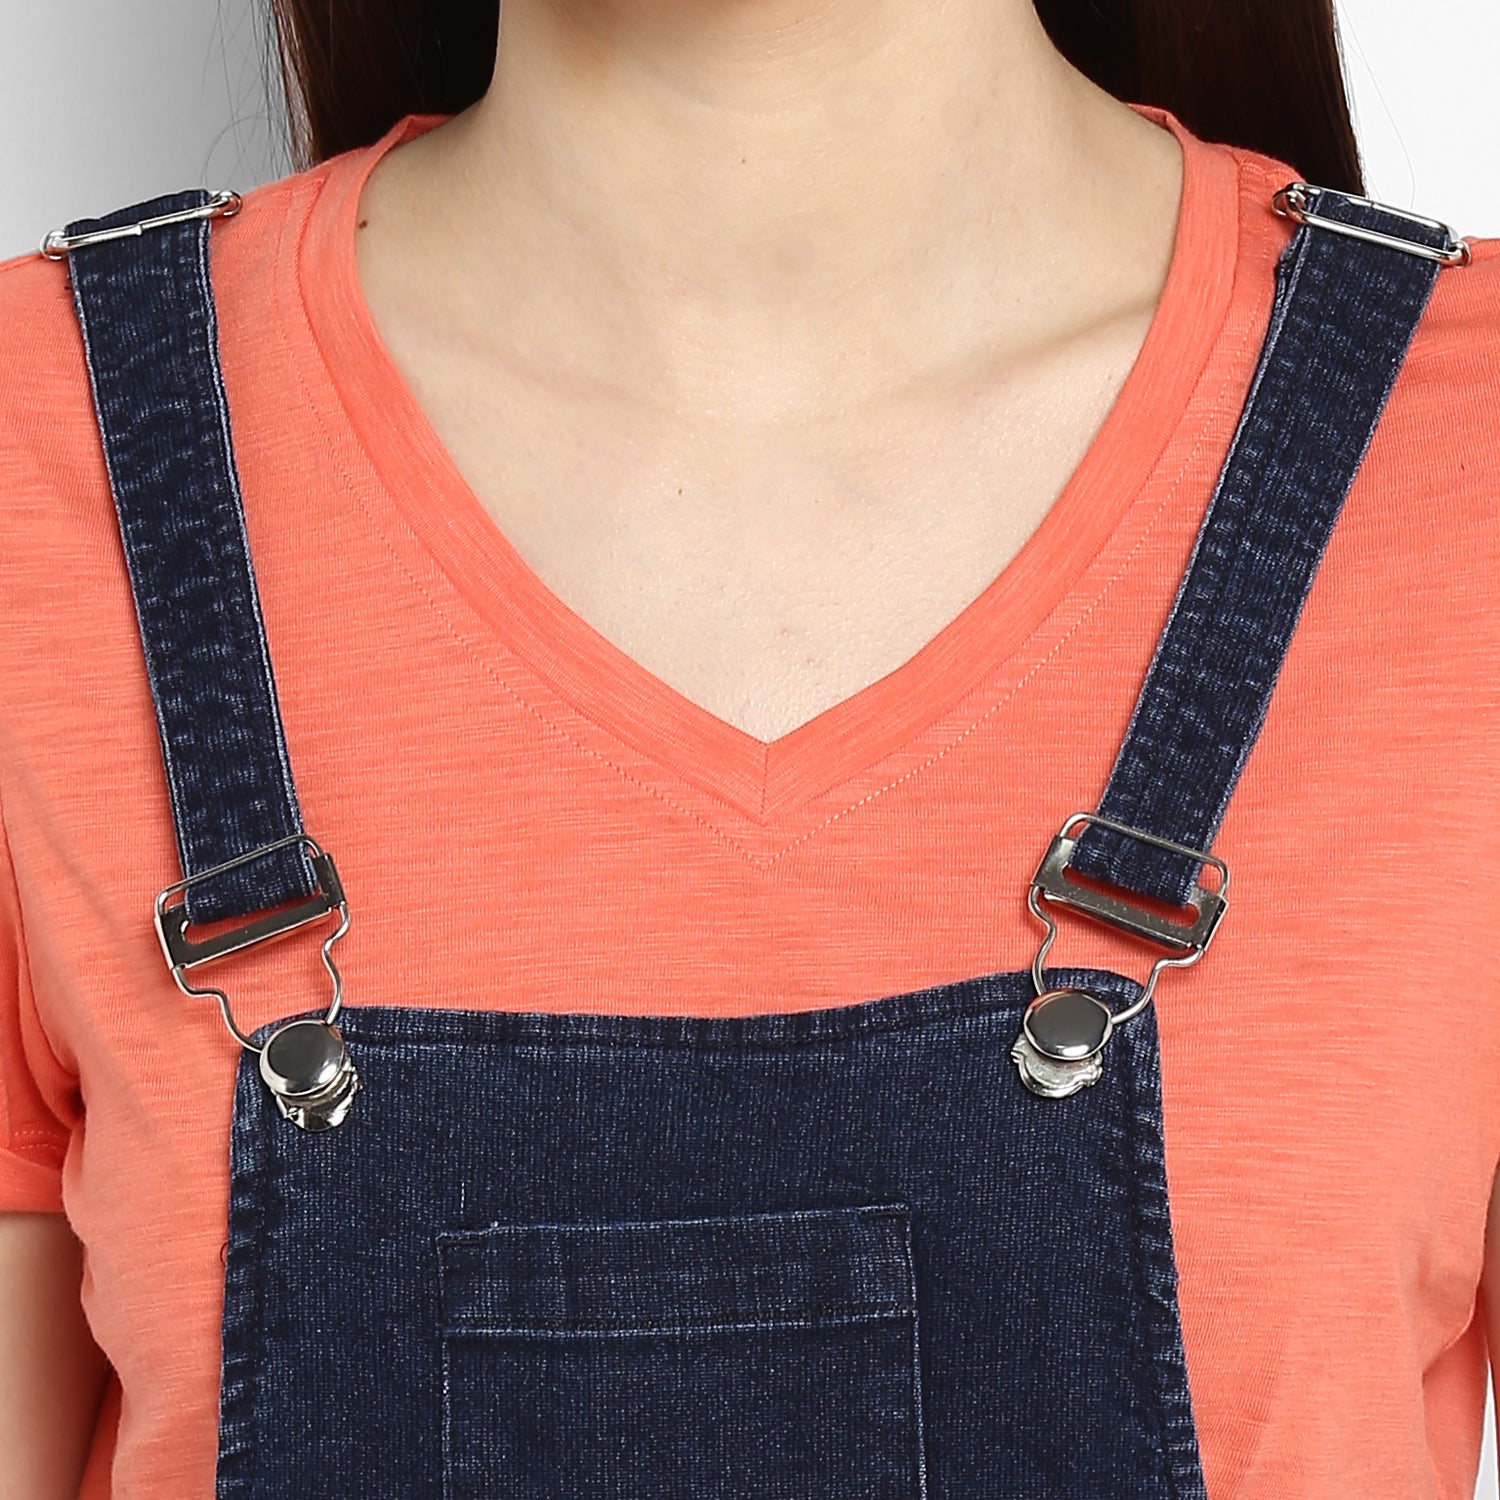 Women's Stretchable Denim Washed effect Shorts Style Dungarees(inner not provided) - StyleStone